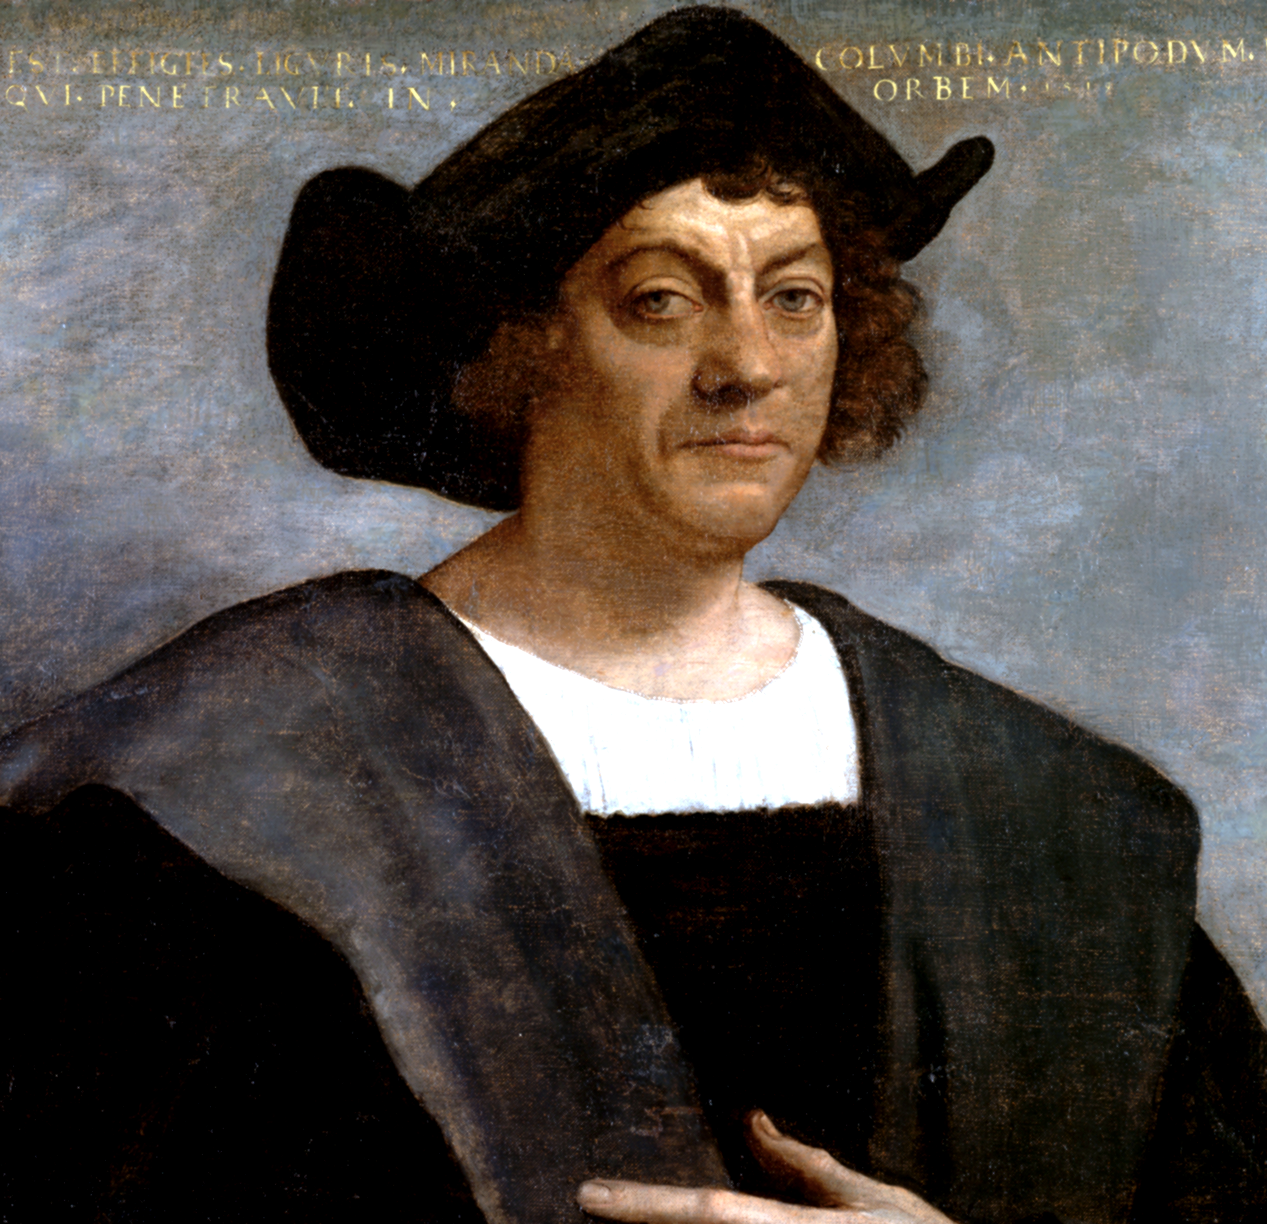 Christopher Columbus is attributed for discovering the Americas. Photo from Wikimedia Commons.